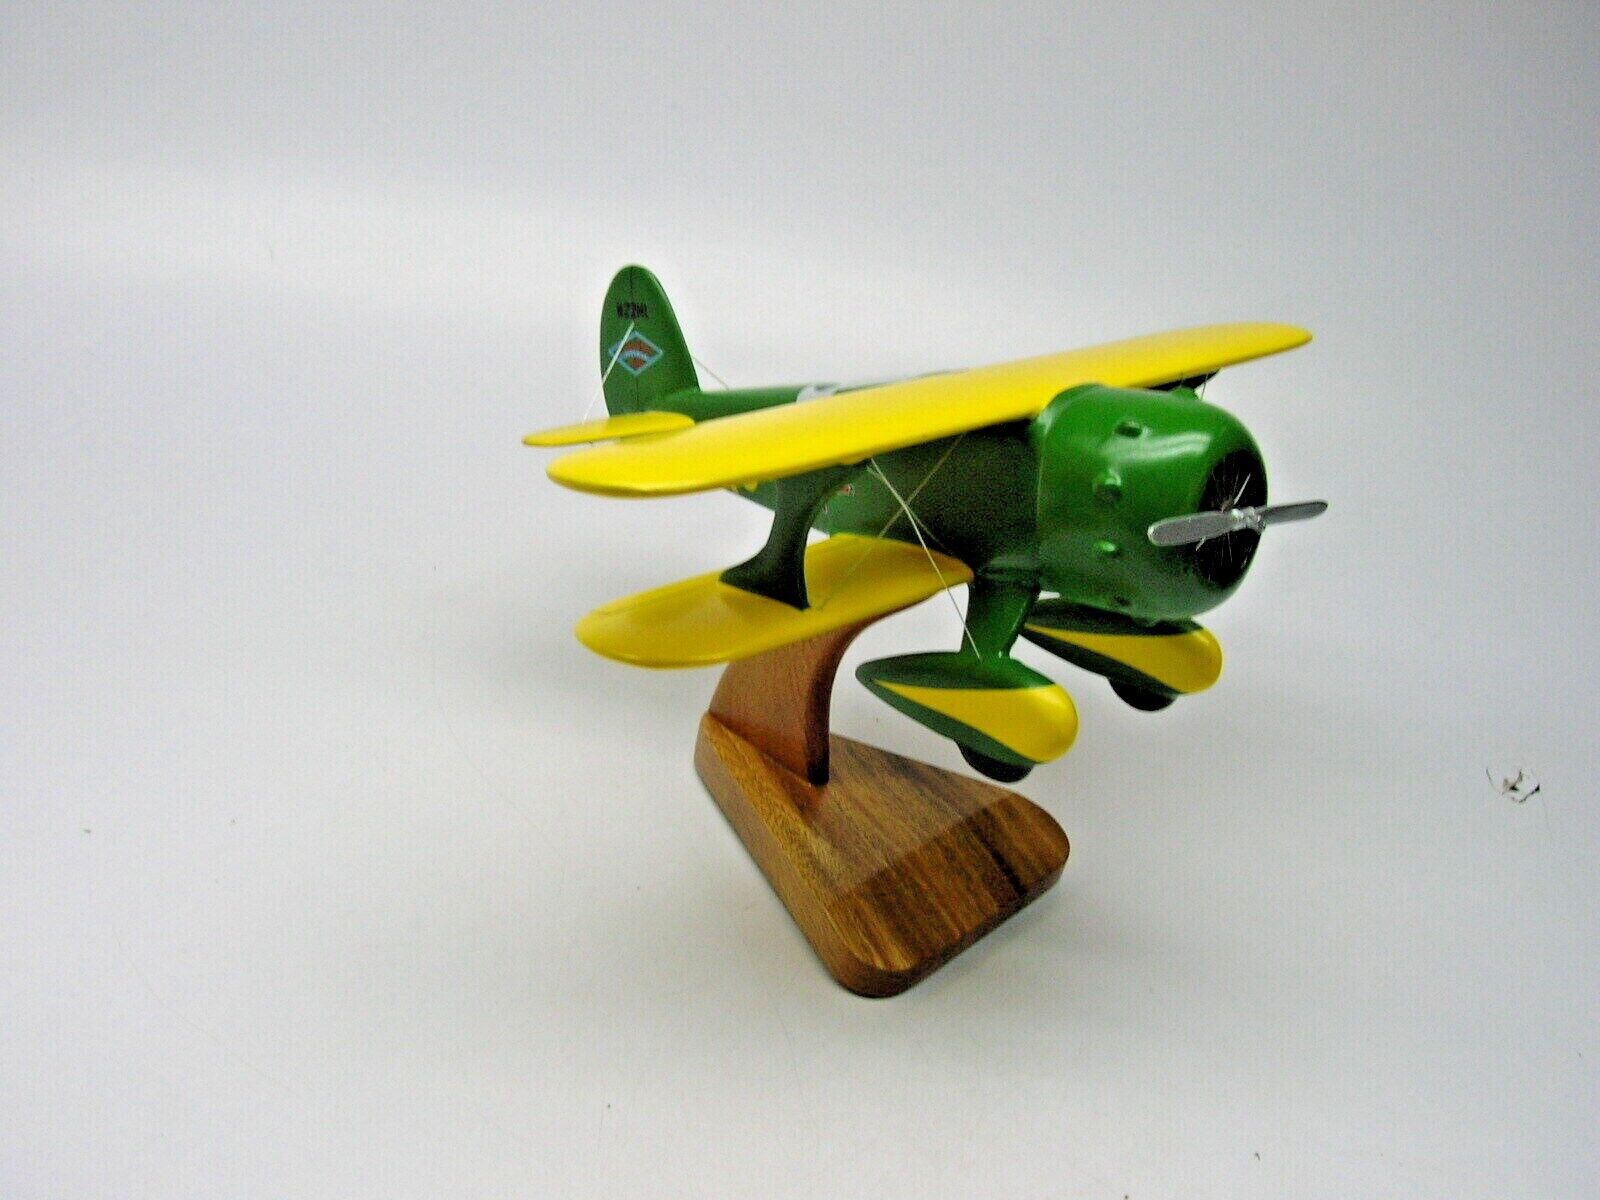 Laird Super Solution Sky Buzzard LC-DW300 Airplane Desktop Wood Model Small New